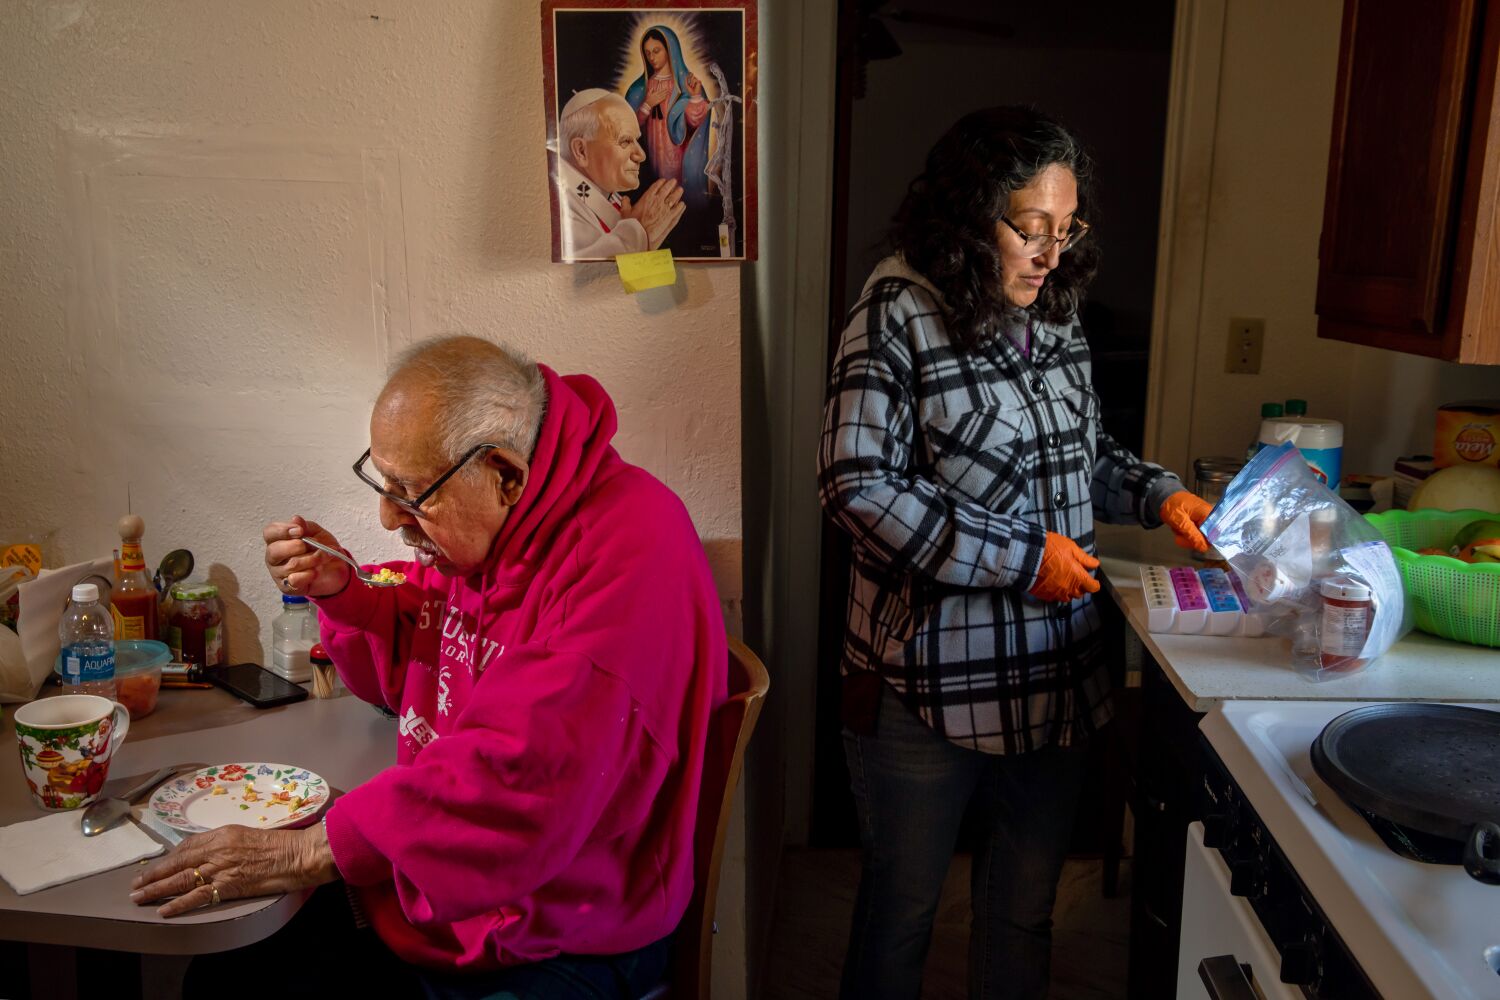 A looming crisis: the crushing cost of elder care and the crippling effects of low wages